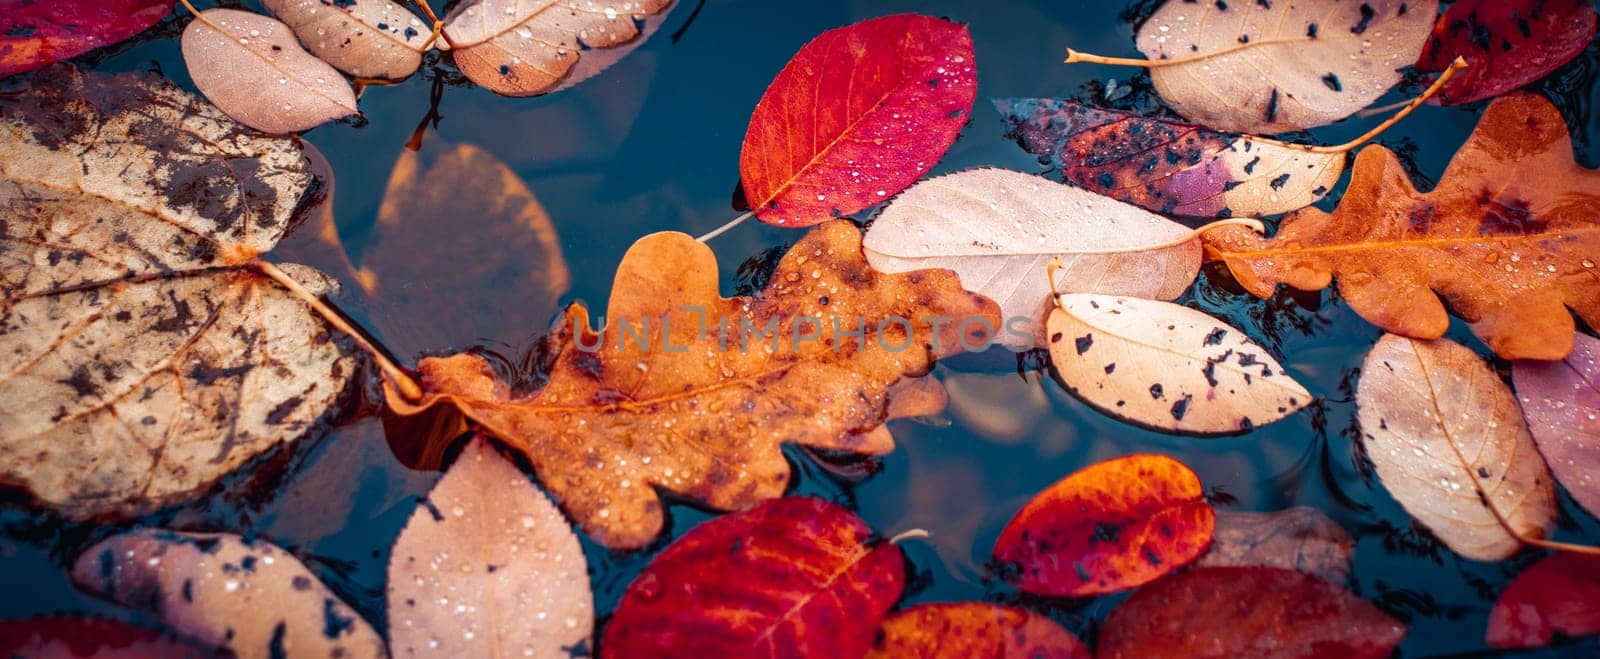 Close up view of a garden pond with autumn leaves concept photo. Colorful leaves under rain. Beautiful nature scenery photography. Idyllic scene. High quality picture for wallpaper, travel blog.